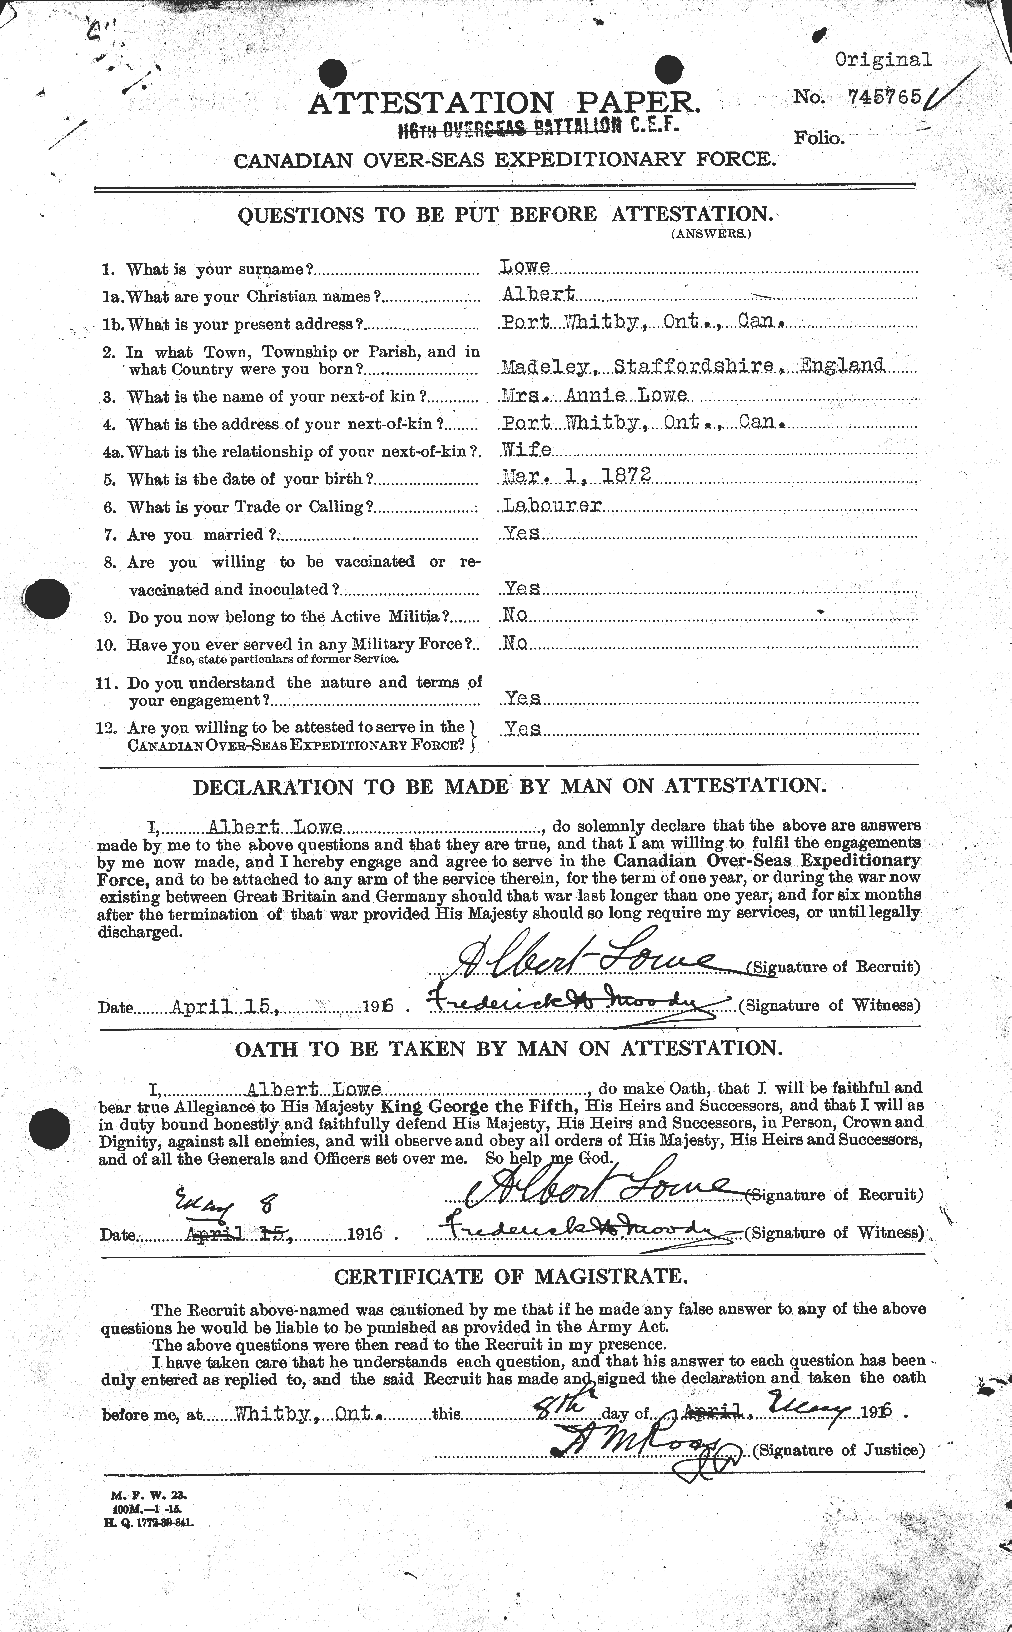 Personnel Records of the First World War - CEF 469487a